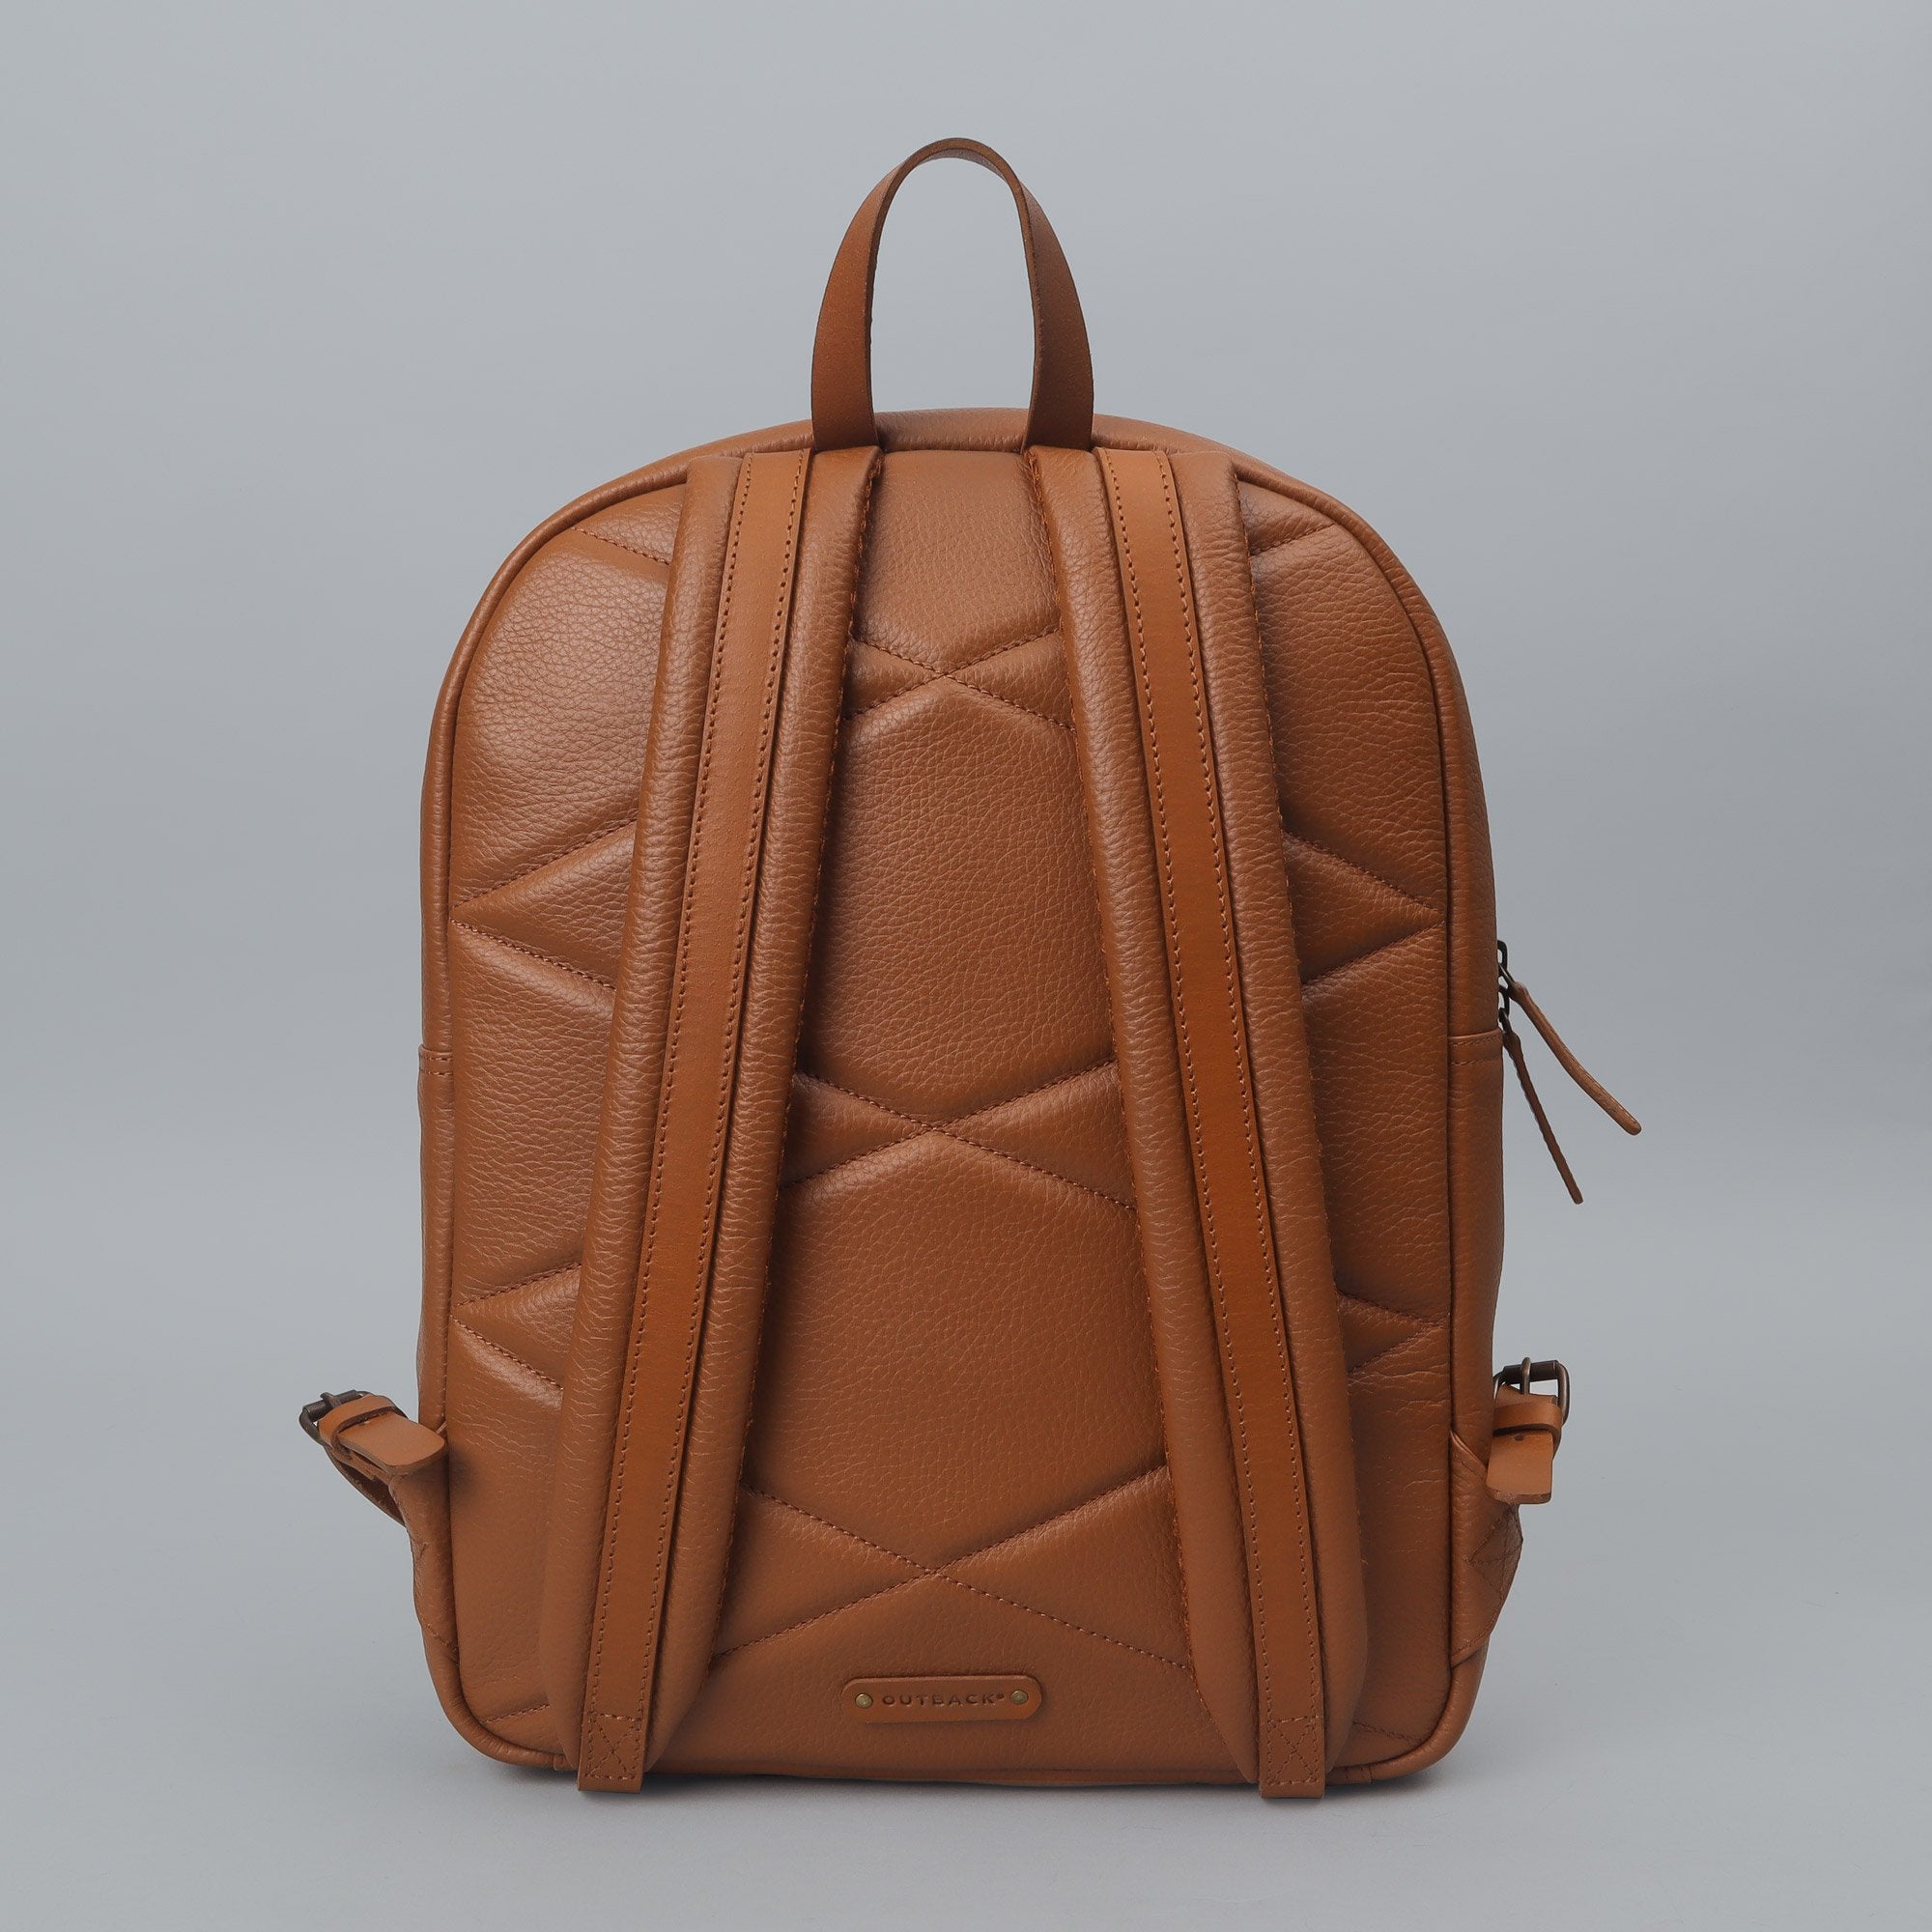 Tan Leather backpack for women